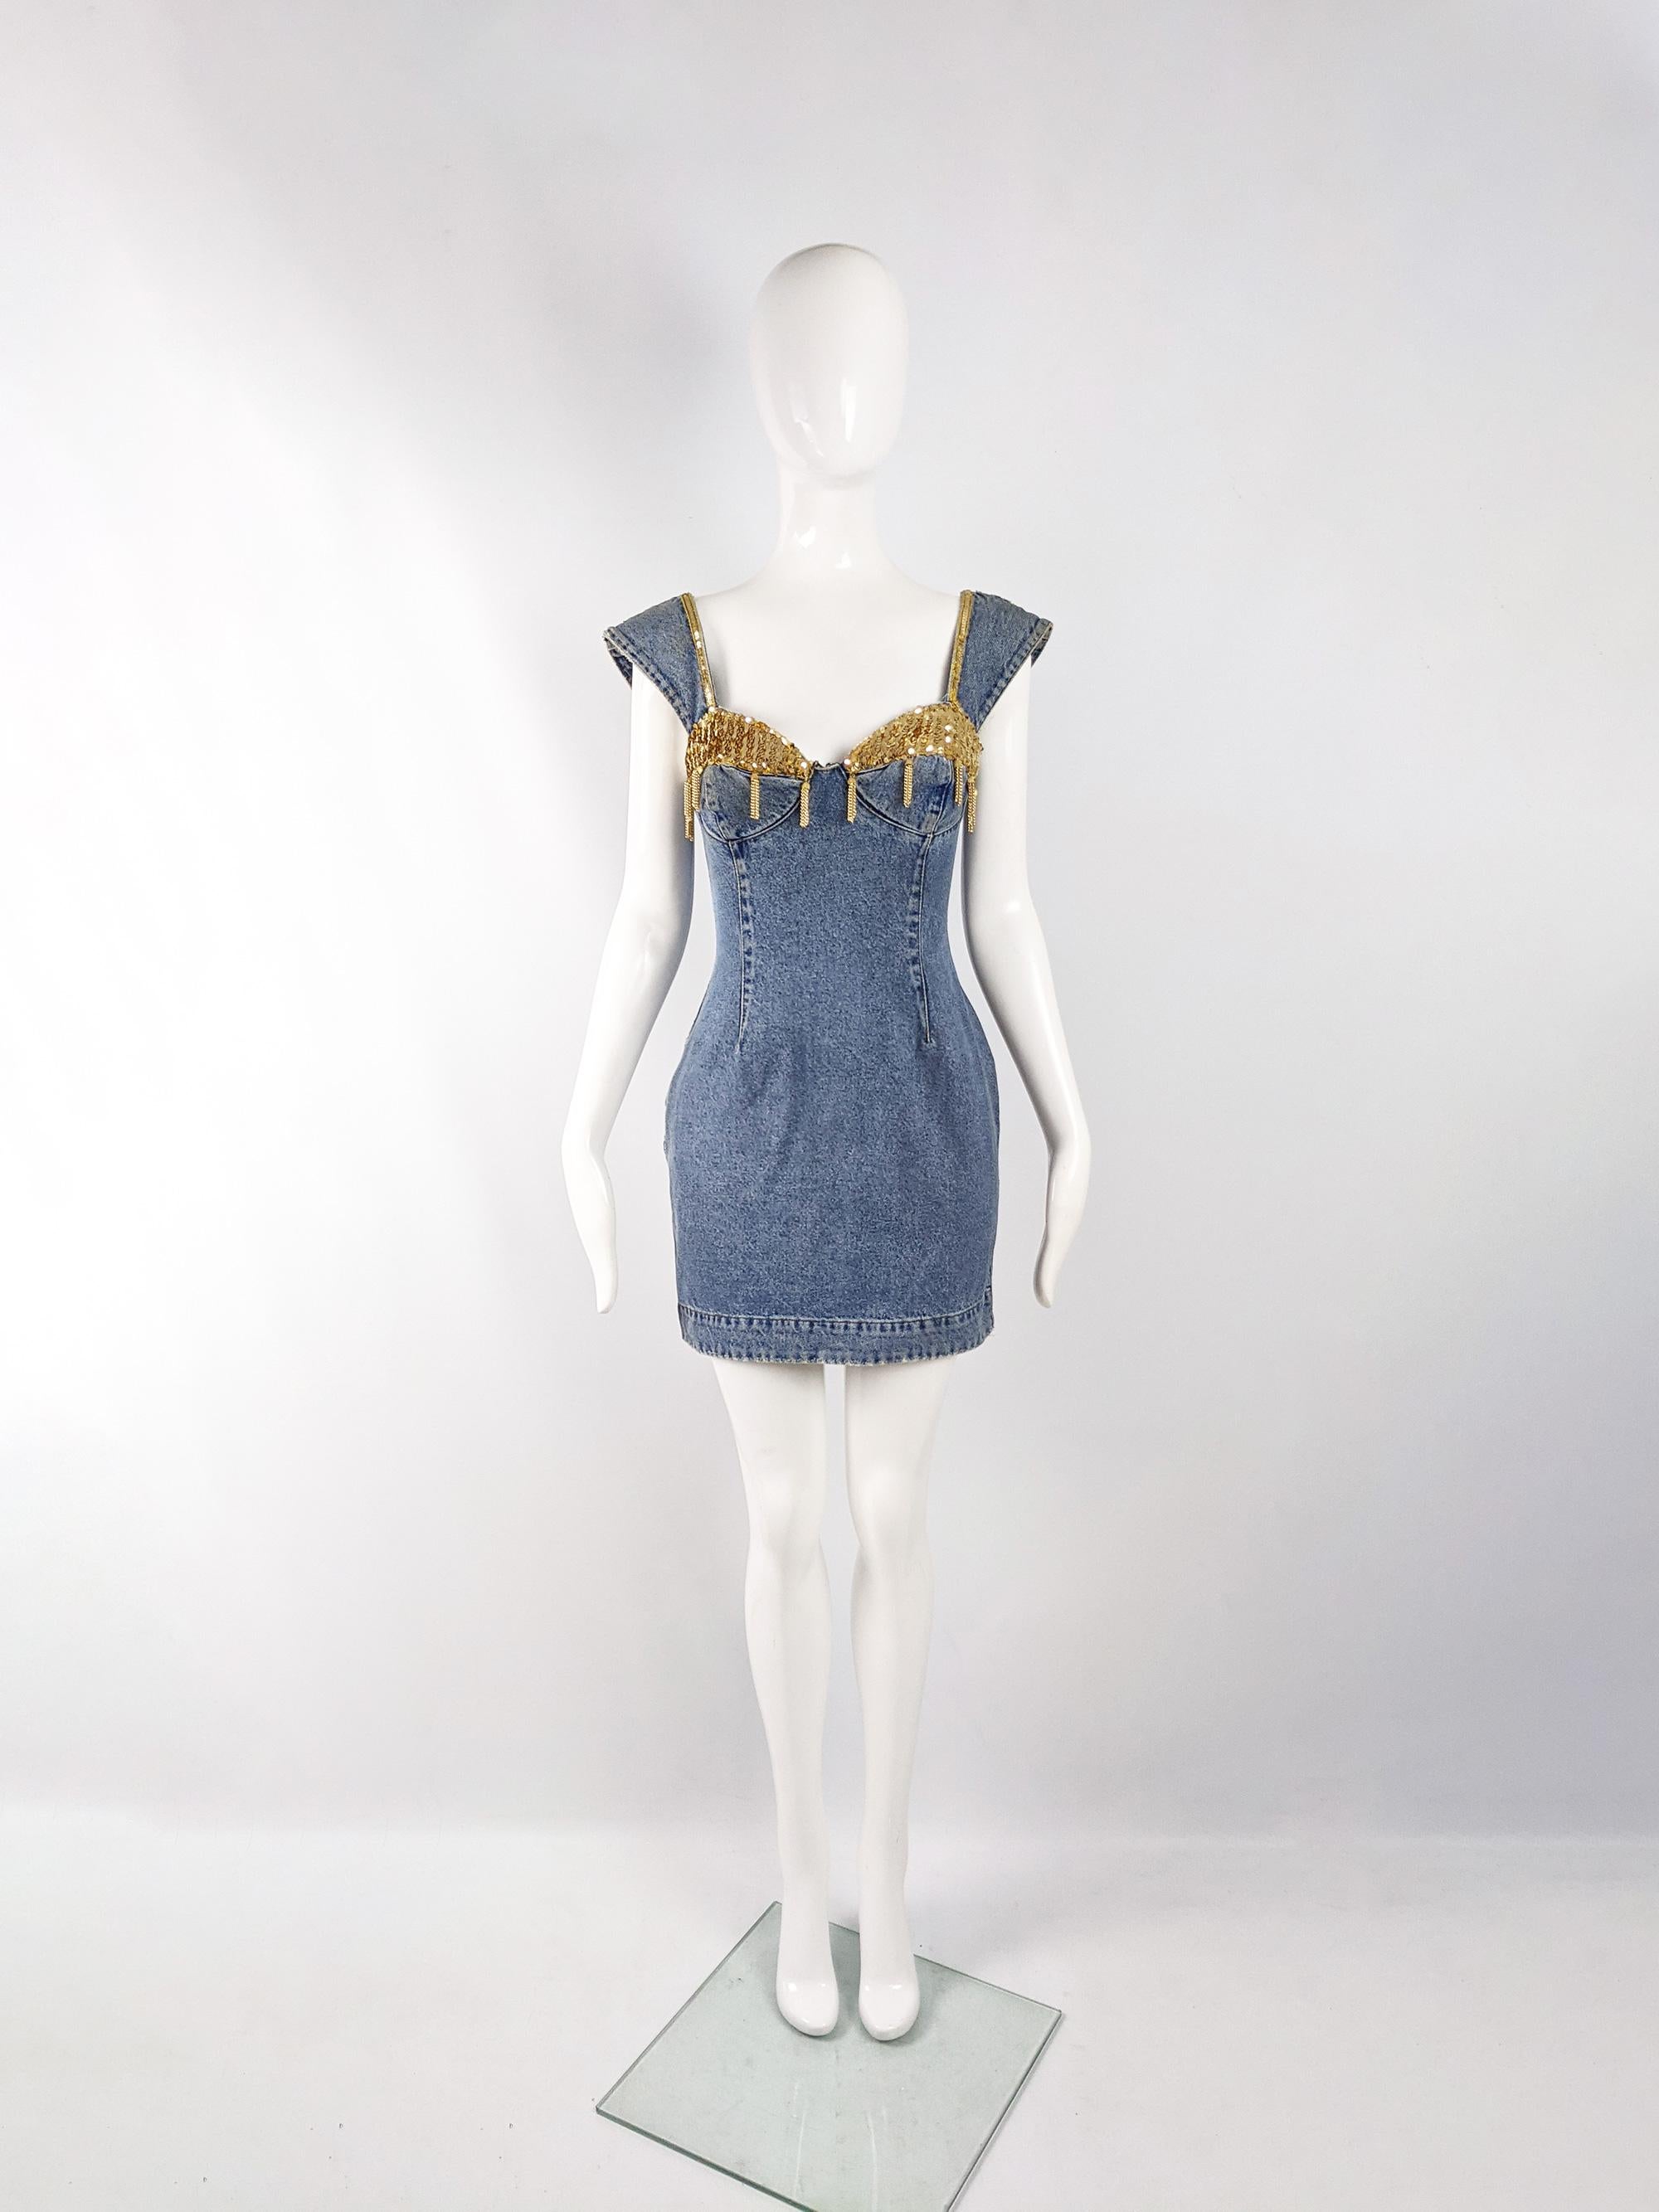 An amazing and rare vintage Katherine Hamnett sleeveless denim dress from the late 80s with intentionally distressed edges and fabulous fringed beading and sequins on the bust, creating an elevated punk / grunge look. 

Size: Marked vintage IT 42